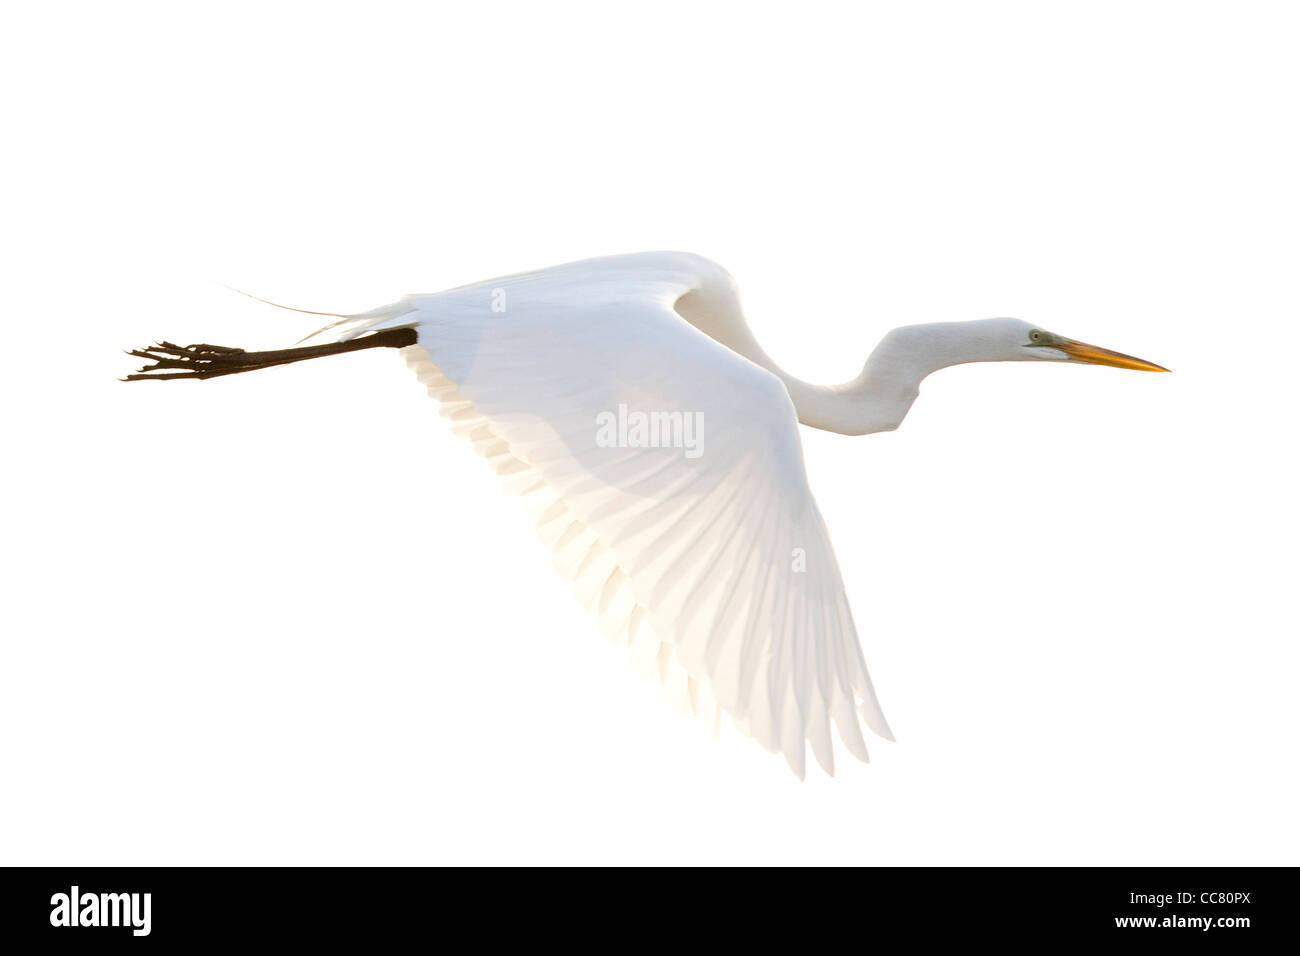 The Great Egret is a large wading bird. Stock Photo